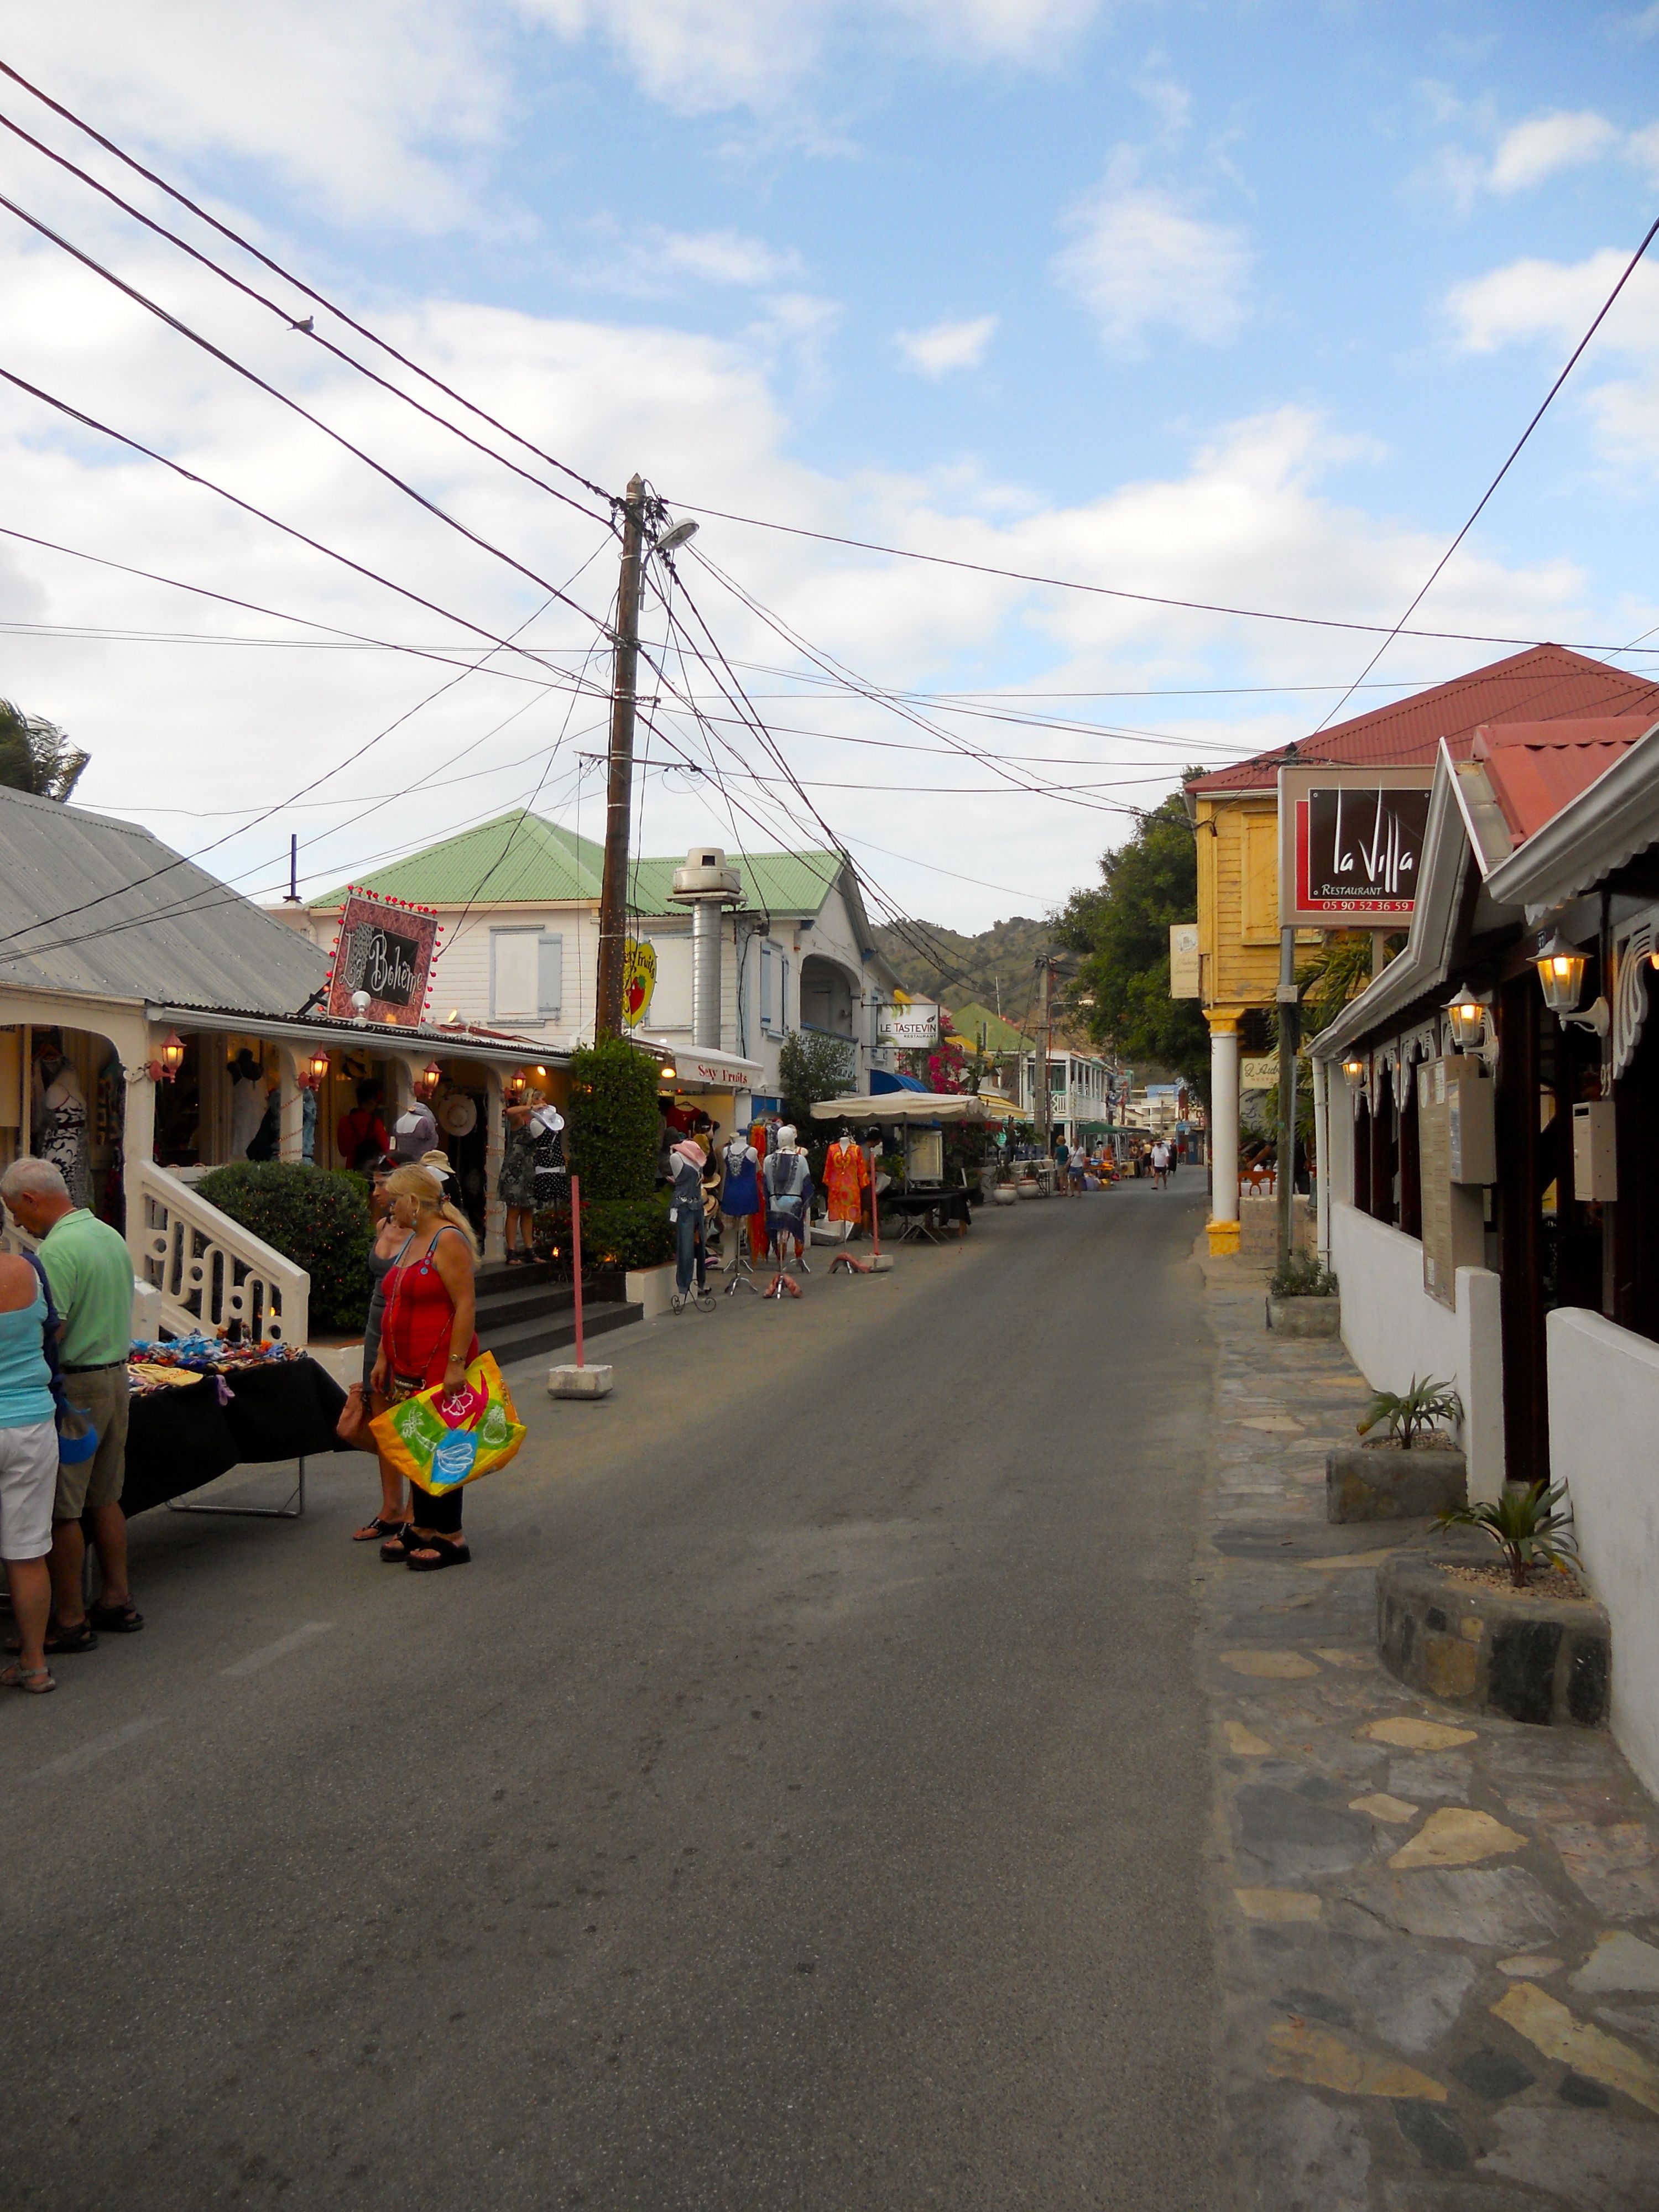 The town of Grand Case, Saint Martin. My own photo.